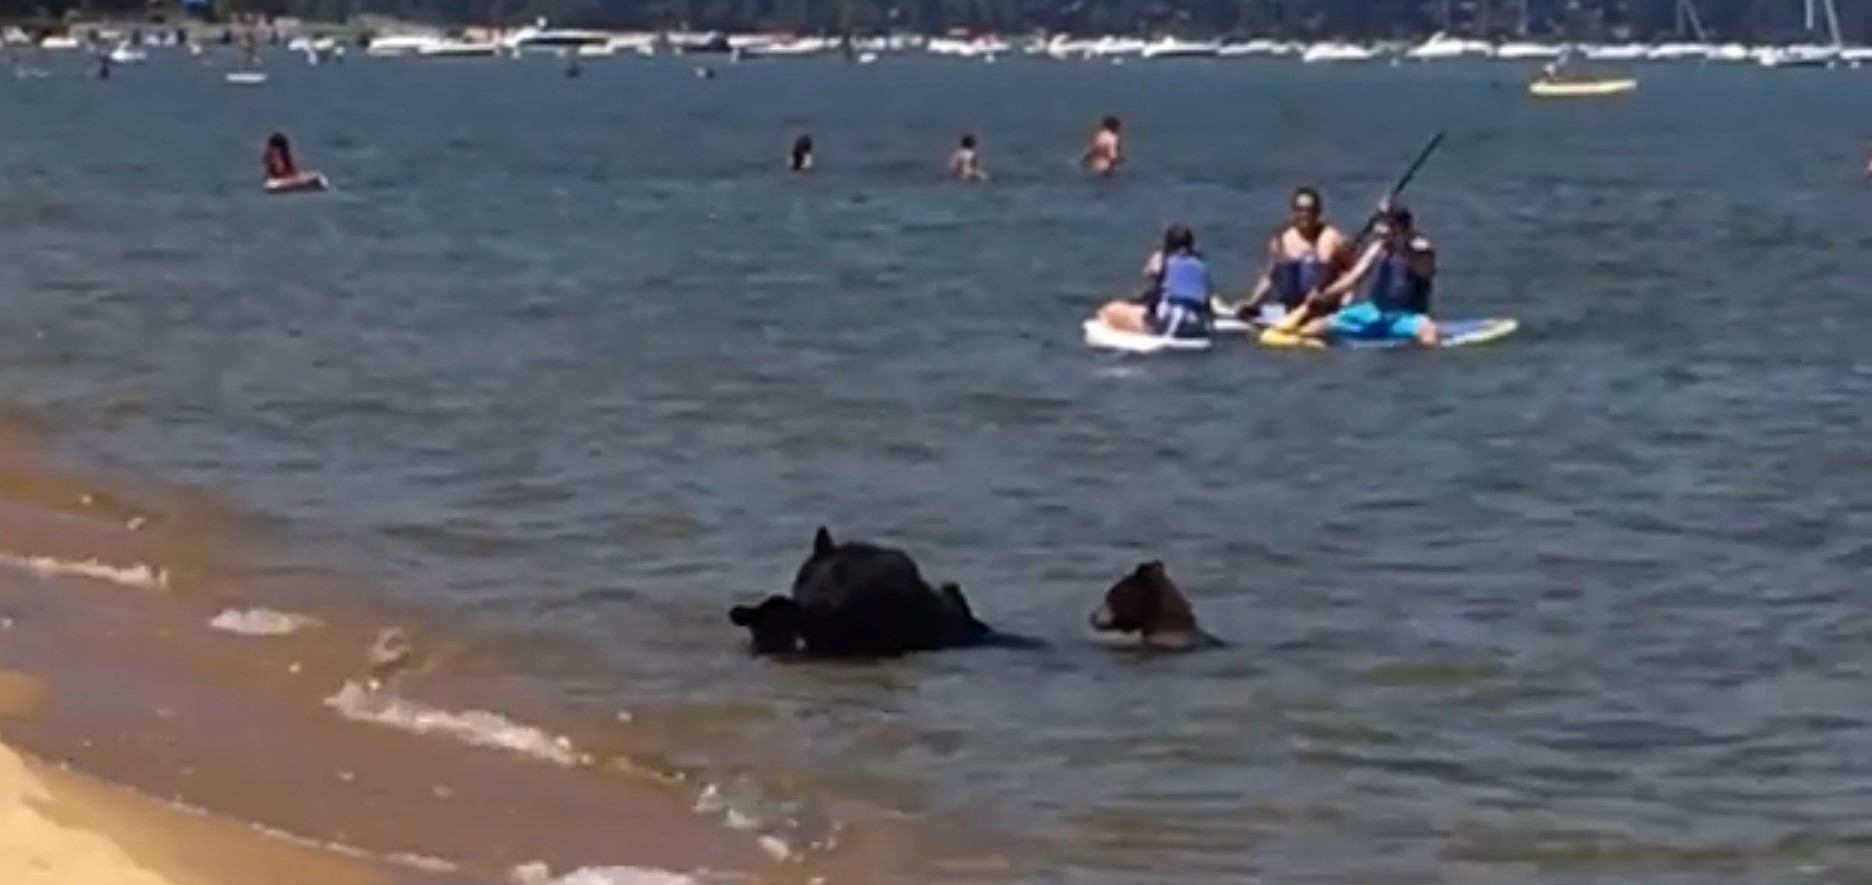 Everyone Was Having A Good Time At The Beach Until A Pack Of Bears ...